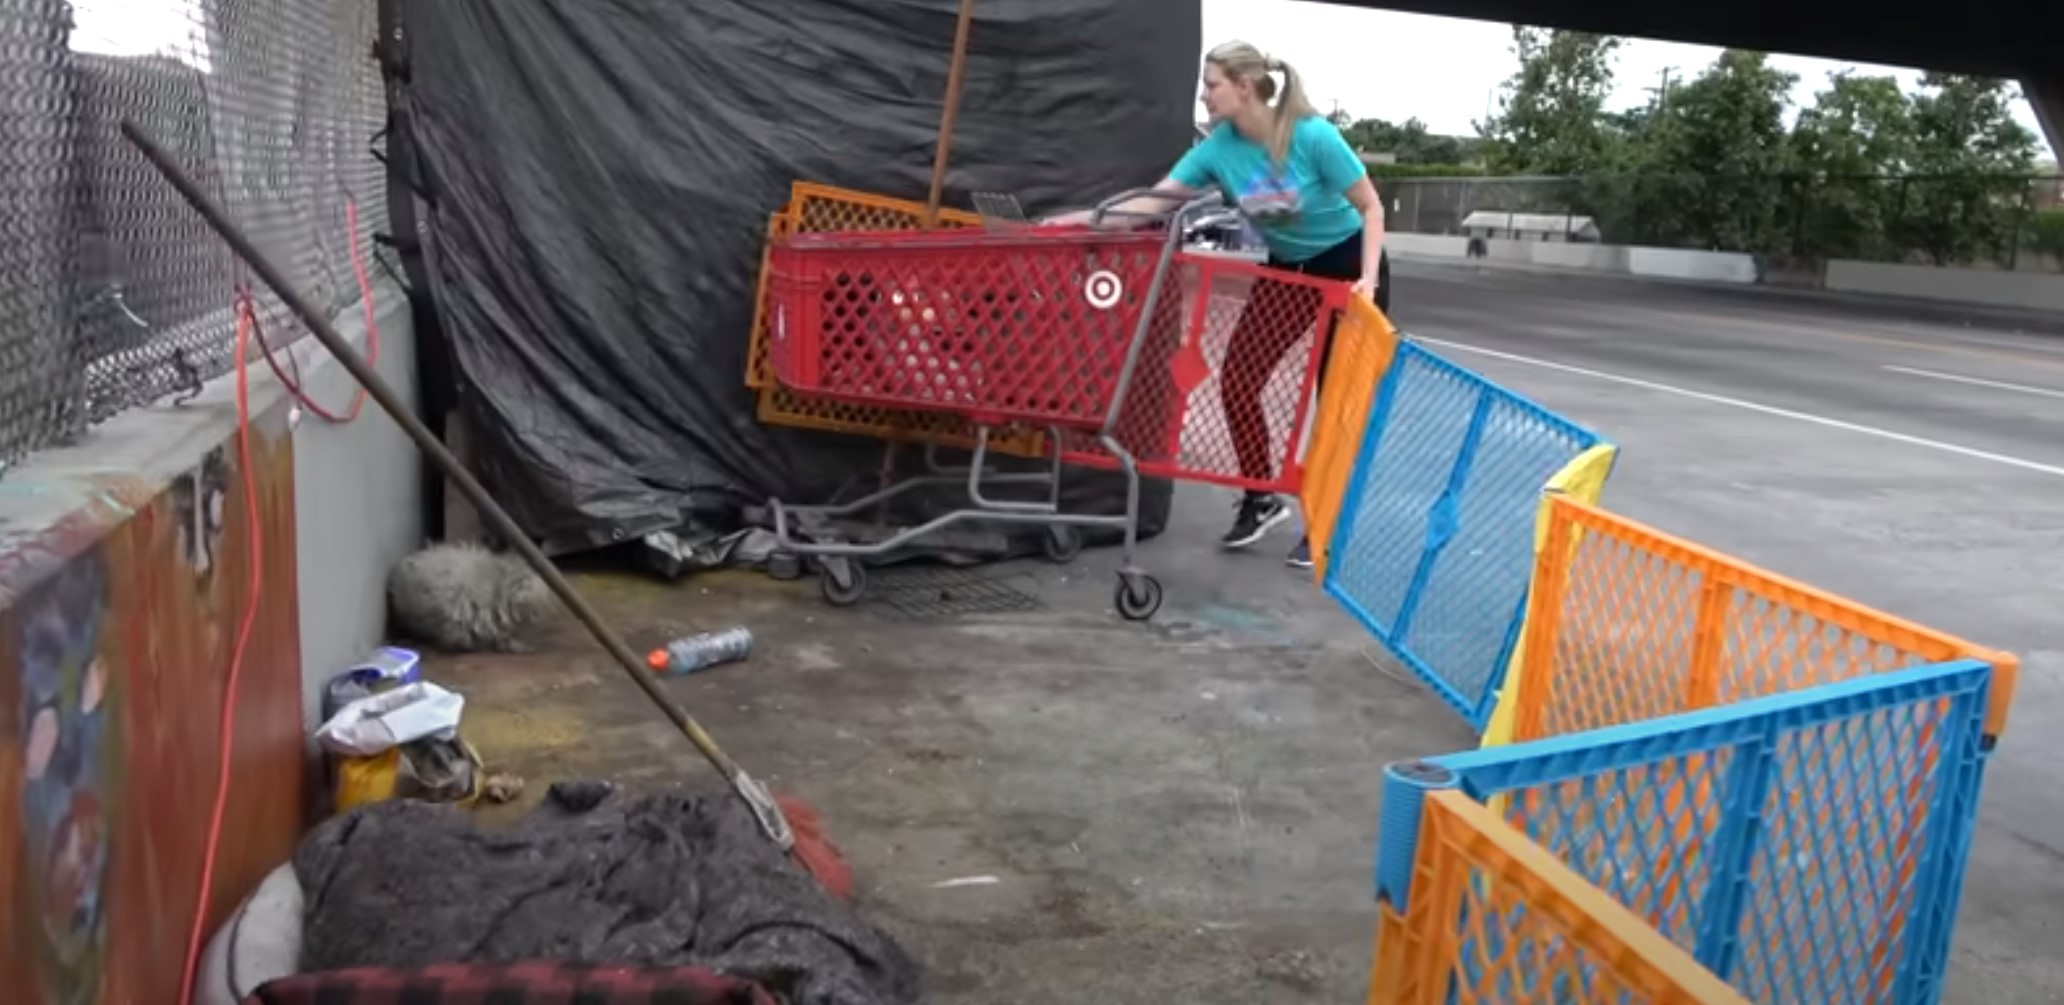 blonde woman with cart